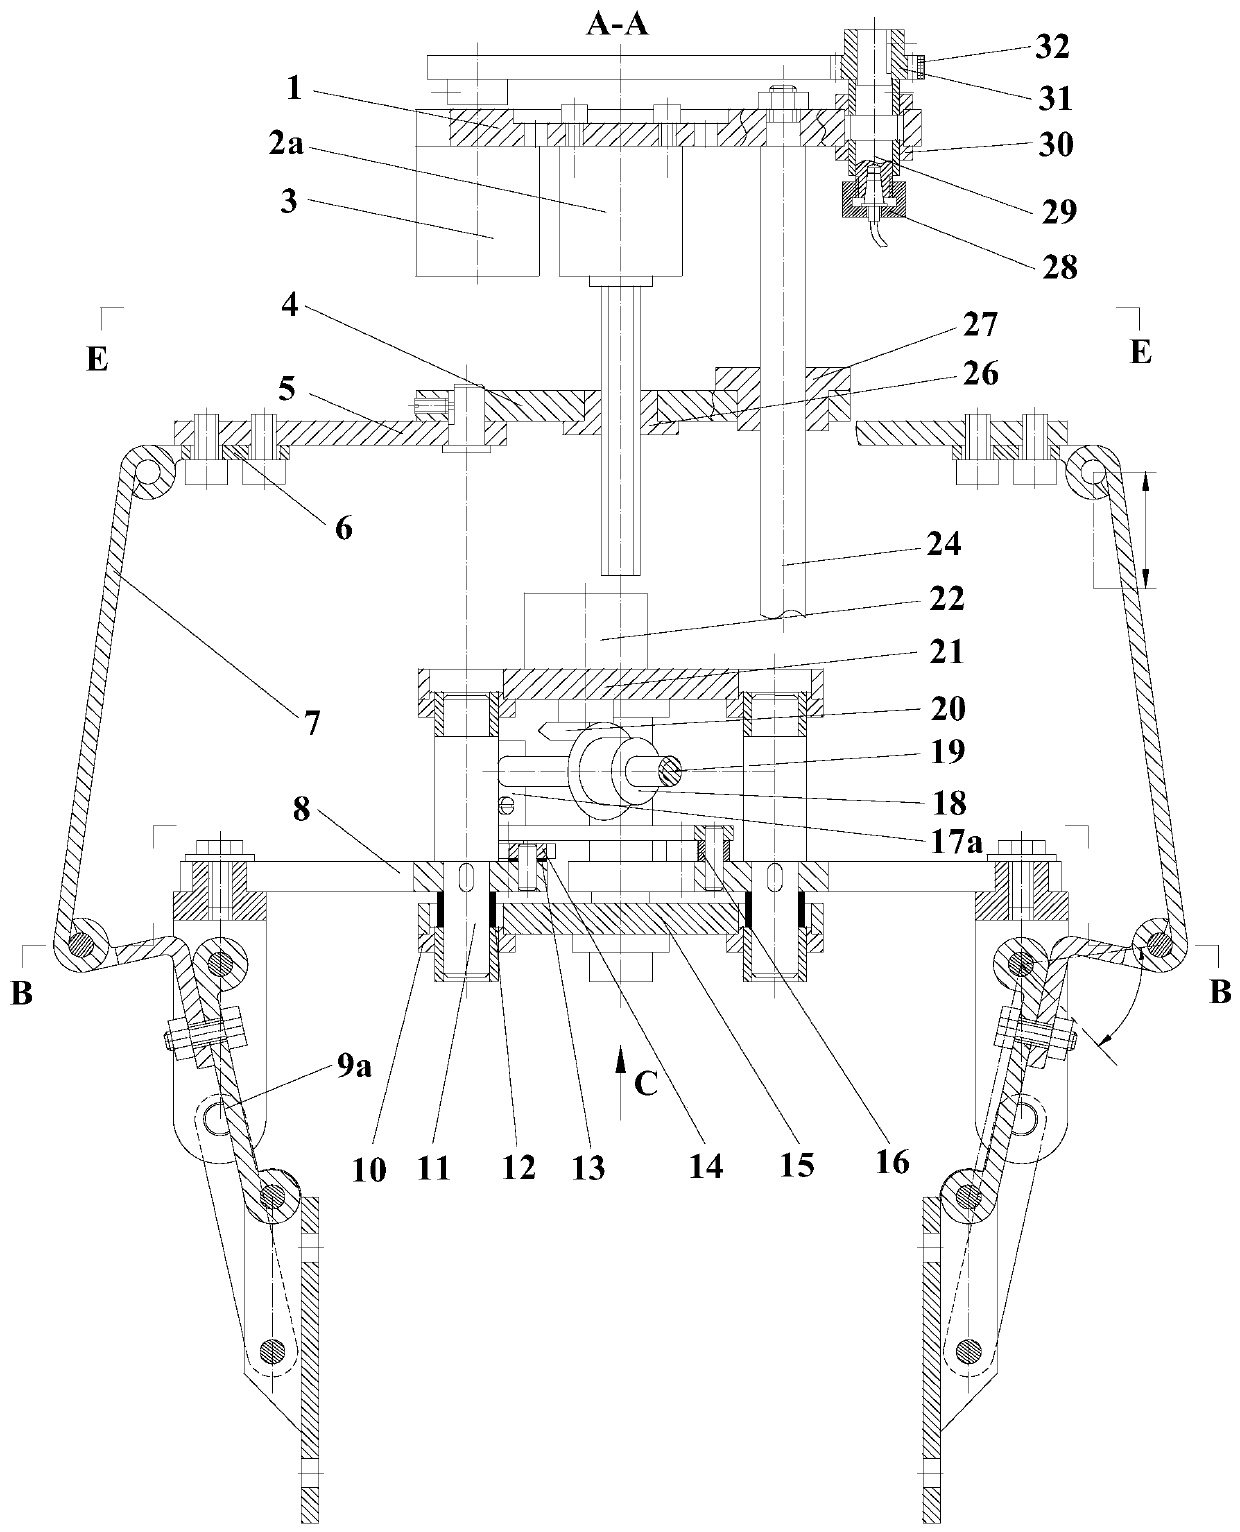 Pinching and flexible shaft drive drum tensioning belt wrapping grabbing composite mechanical hand and method